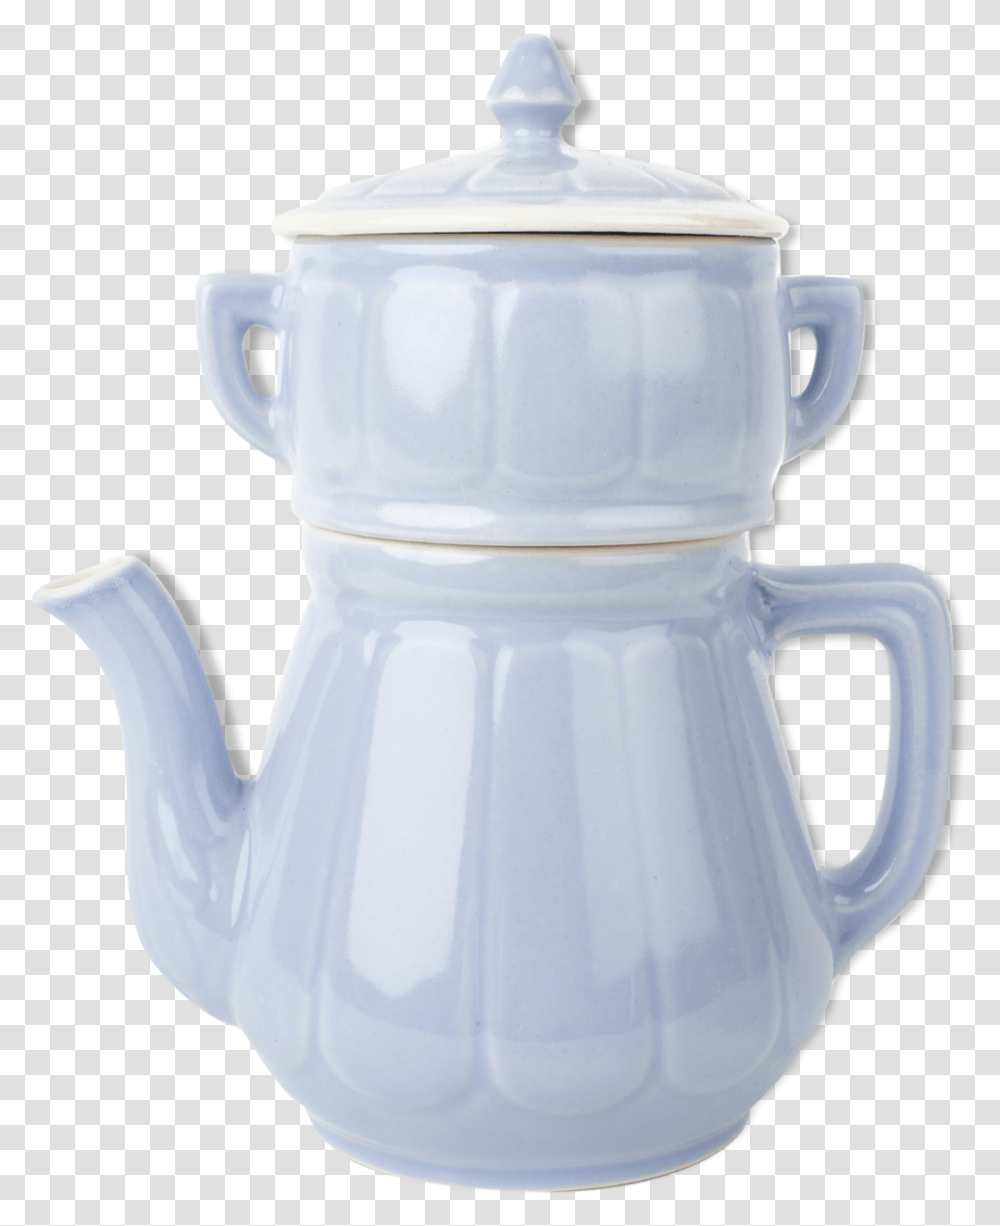 Teapot With Filter And Lid Vintage Sky Blue Ceramic, Pottery, Snowman, Winter, Outdoors Transparent Png